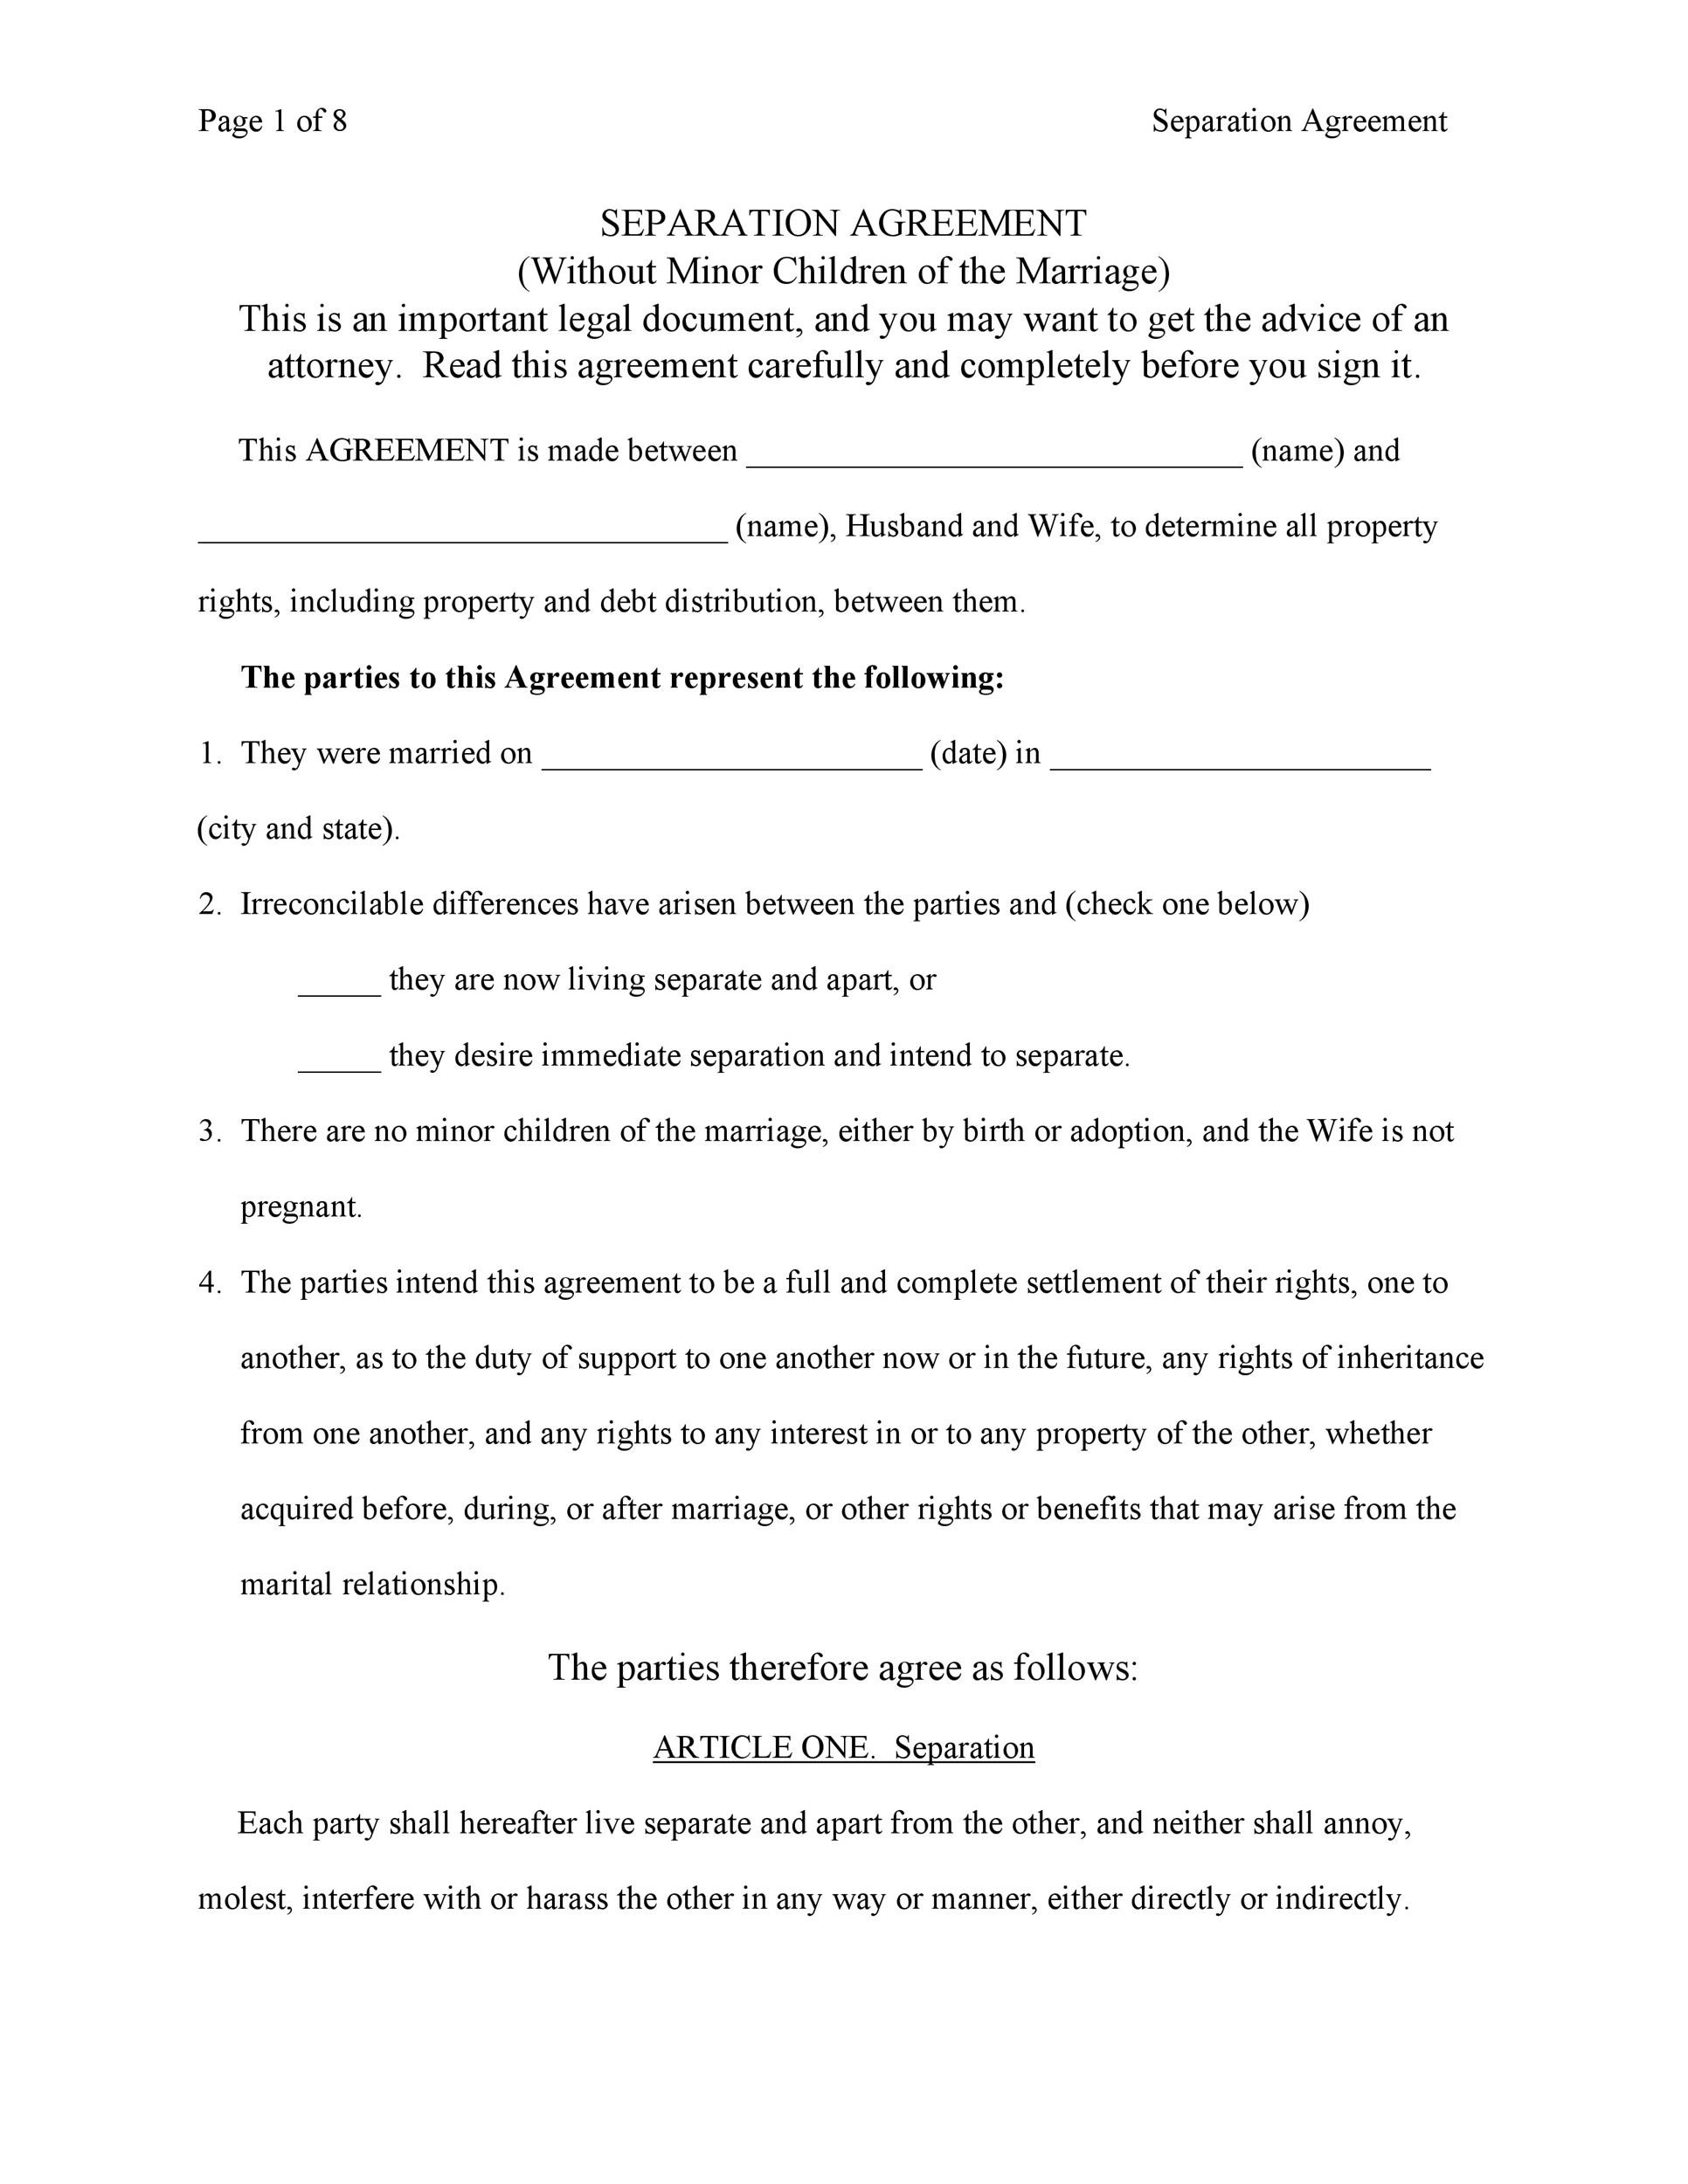 43 Official Separation Agreement Templates / Letters ...